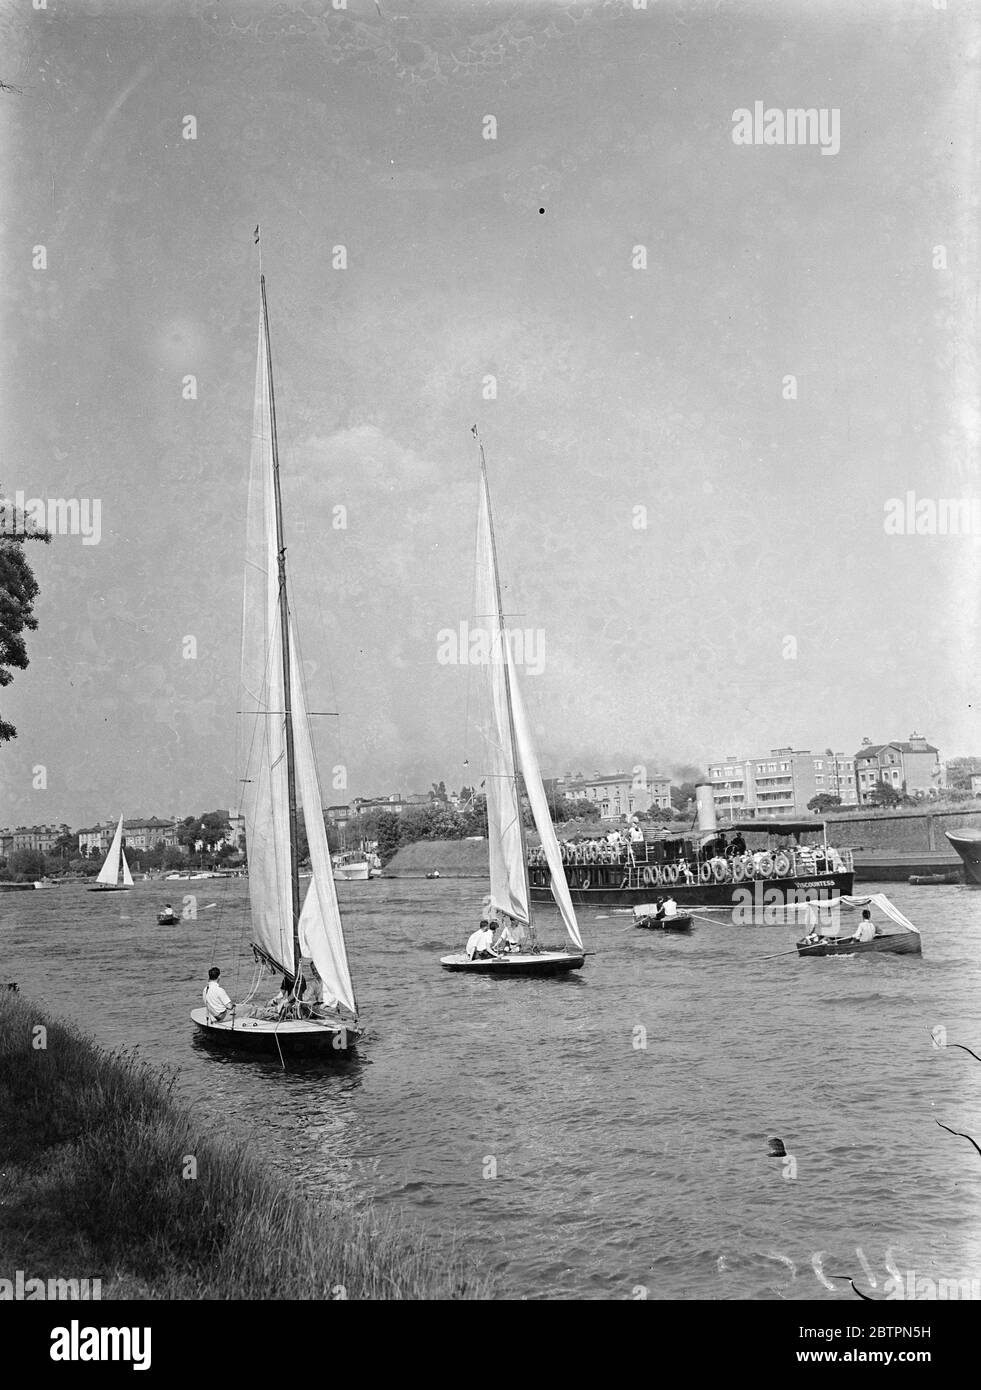 Heatwaves Saturday on the river. Yachts of the Royal Thames Yacht's Club passing serenely over the sun lit Thames at Surbiton where they made a pretty picture for pleasure steamer passengers. 29 May 1937 Stock Photo